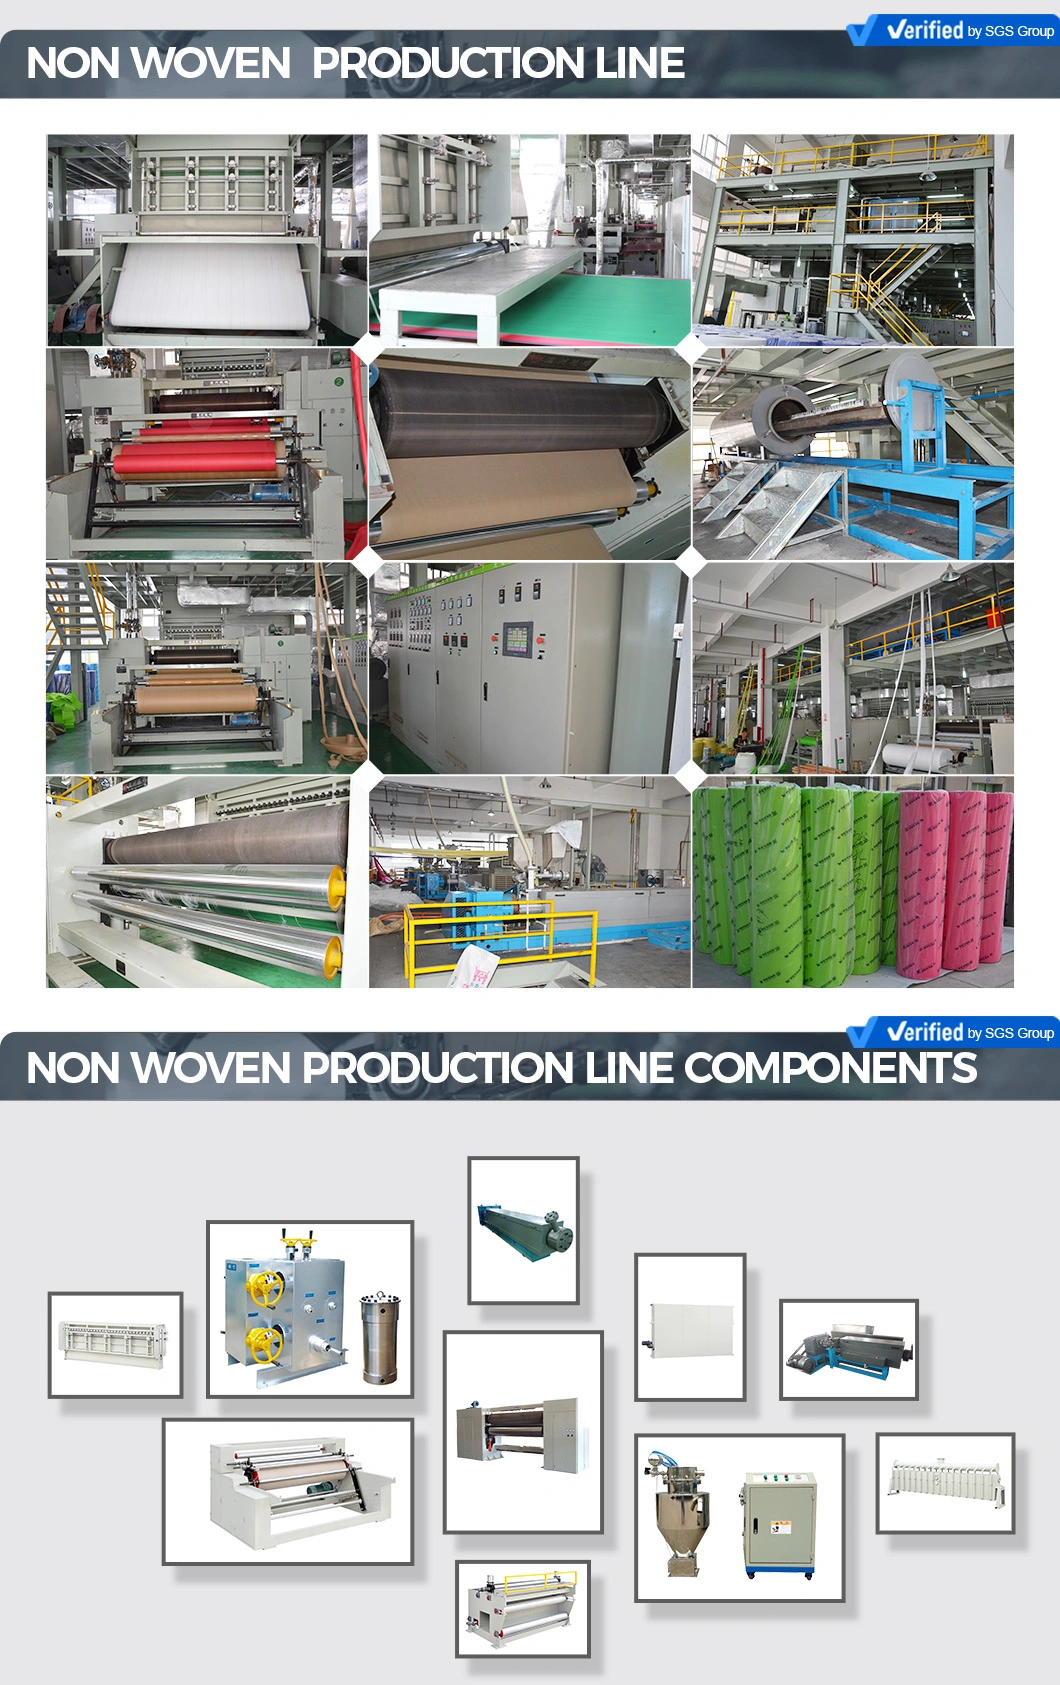 The Latest Single Ss Non Woven Fabric Production Line for Making N95/KN95